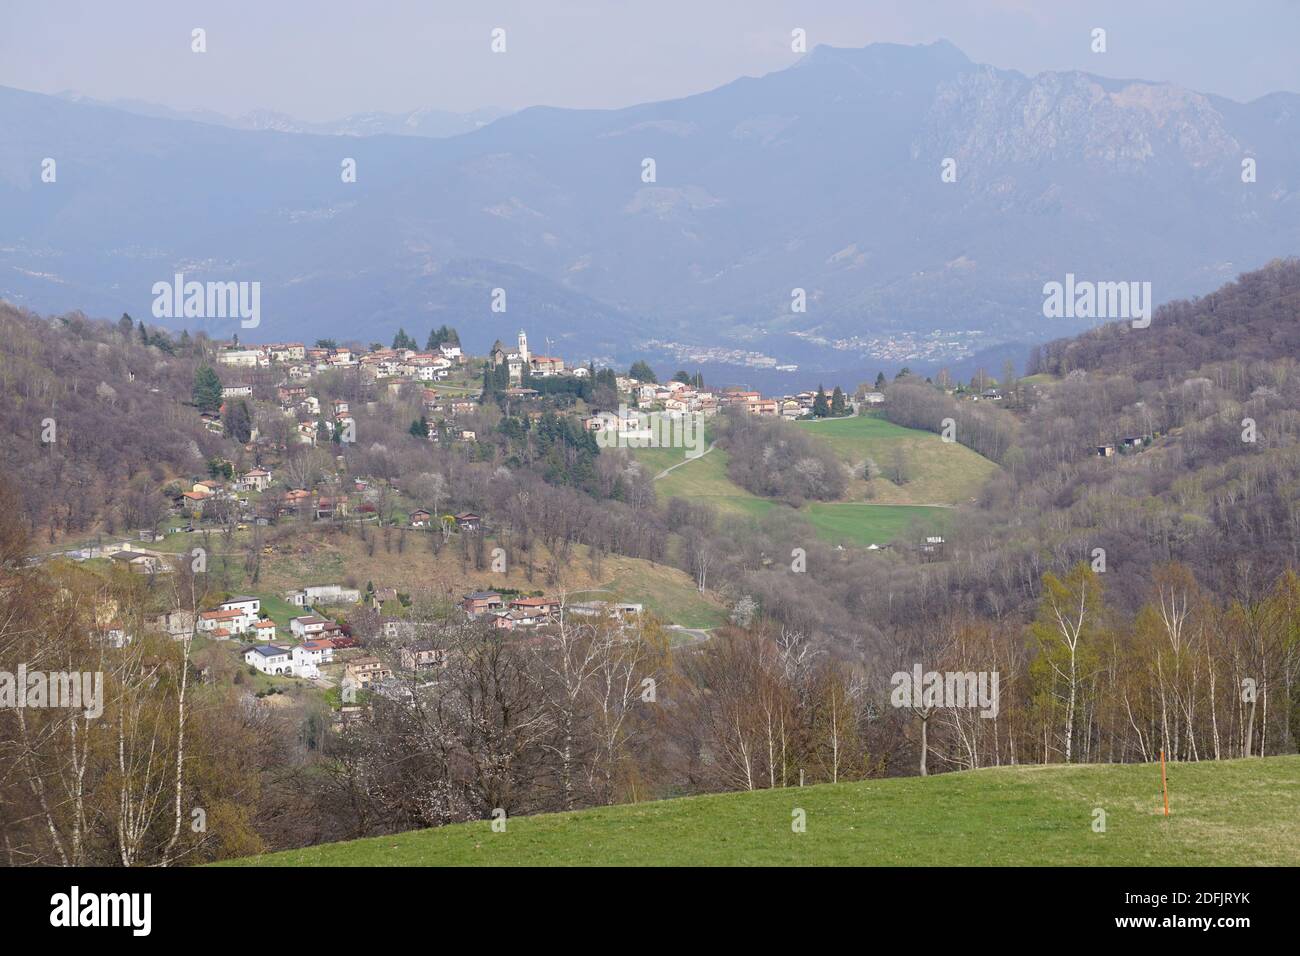 panoramic view of Breno, Ticino nestled in the mountains Stock Photo